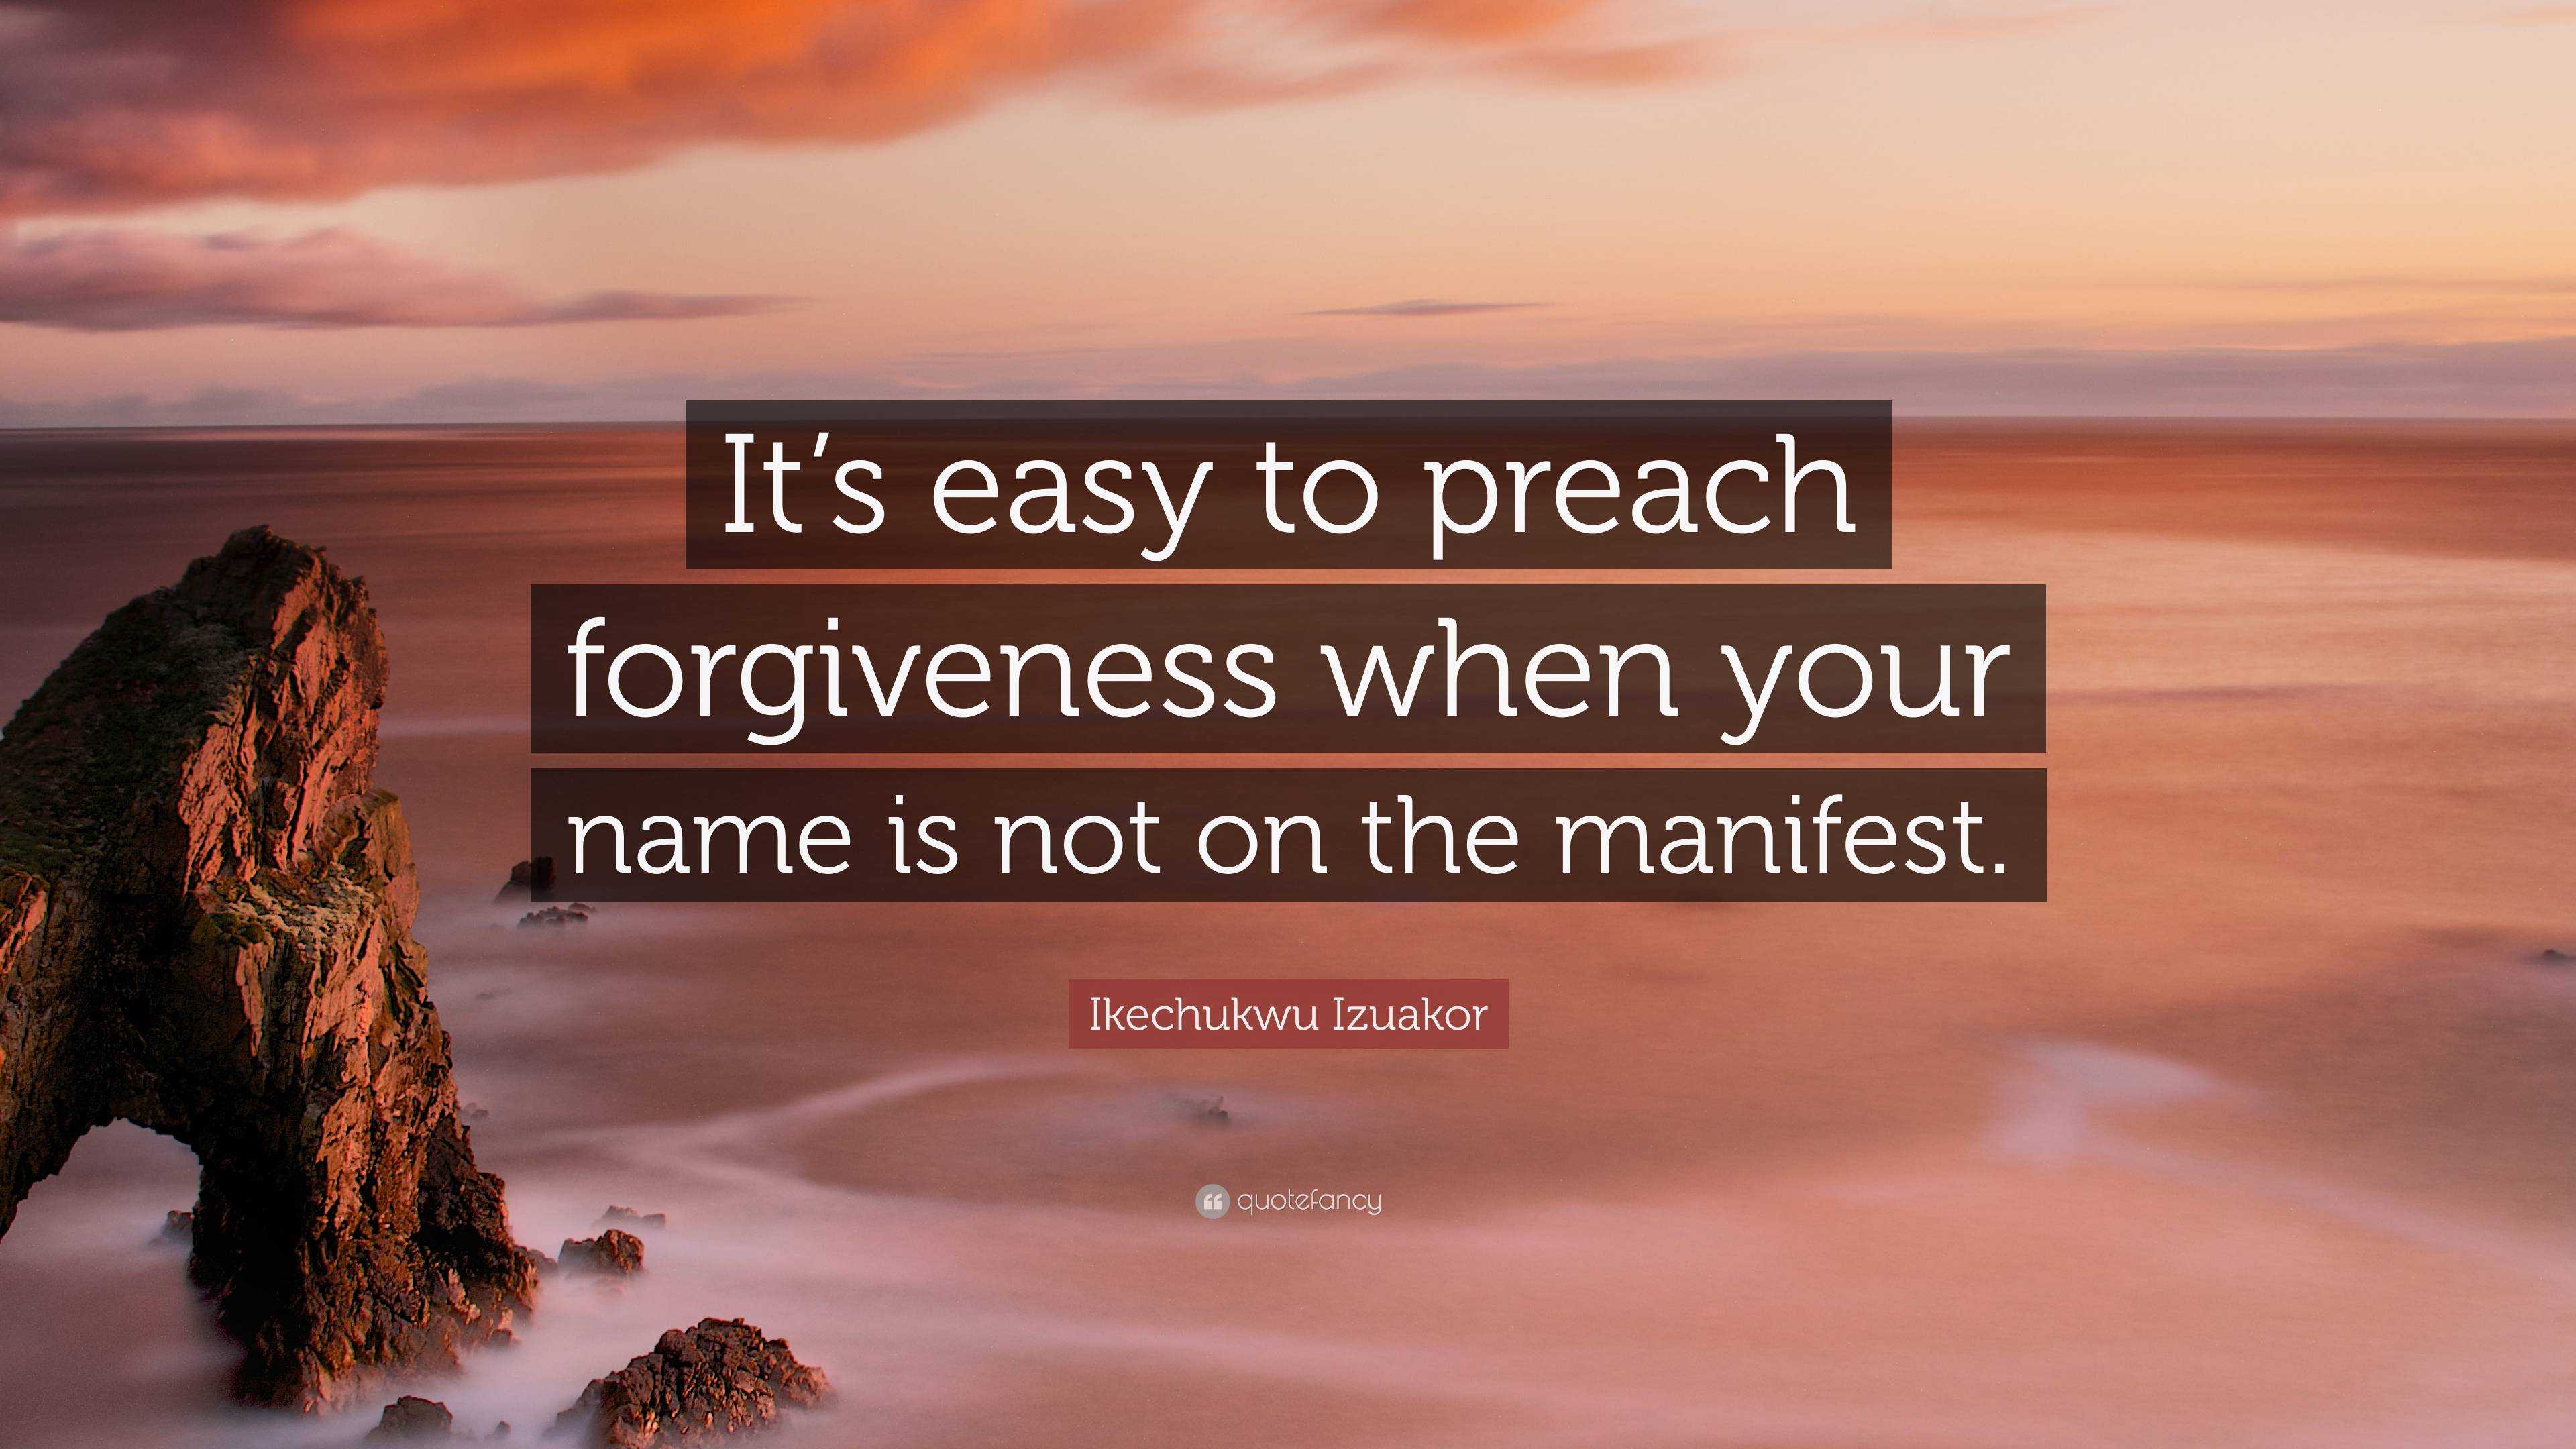 Ikechukwu Izuakor Quote: “It’s easy to preach forgiveness when your ...